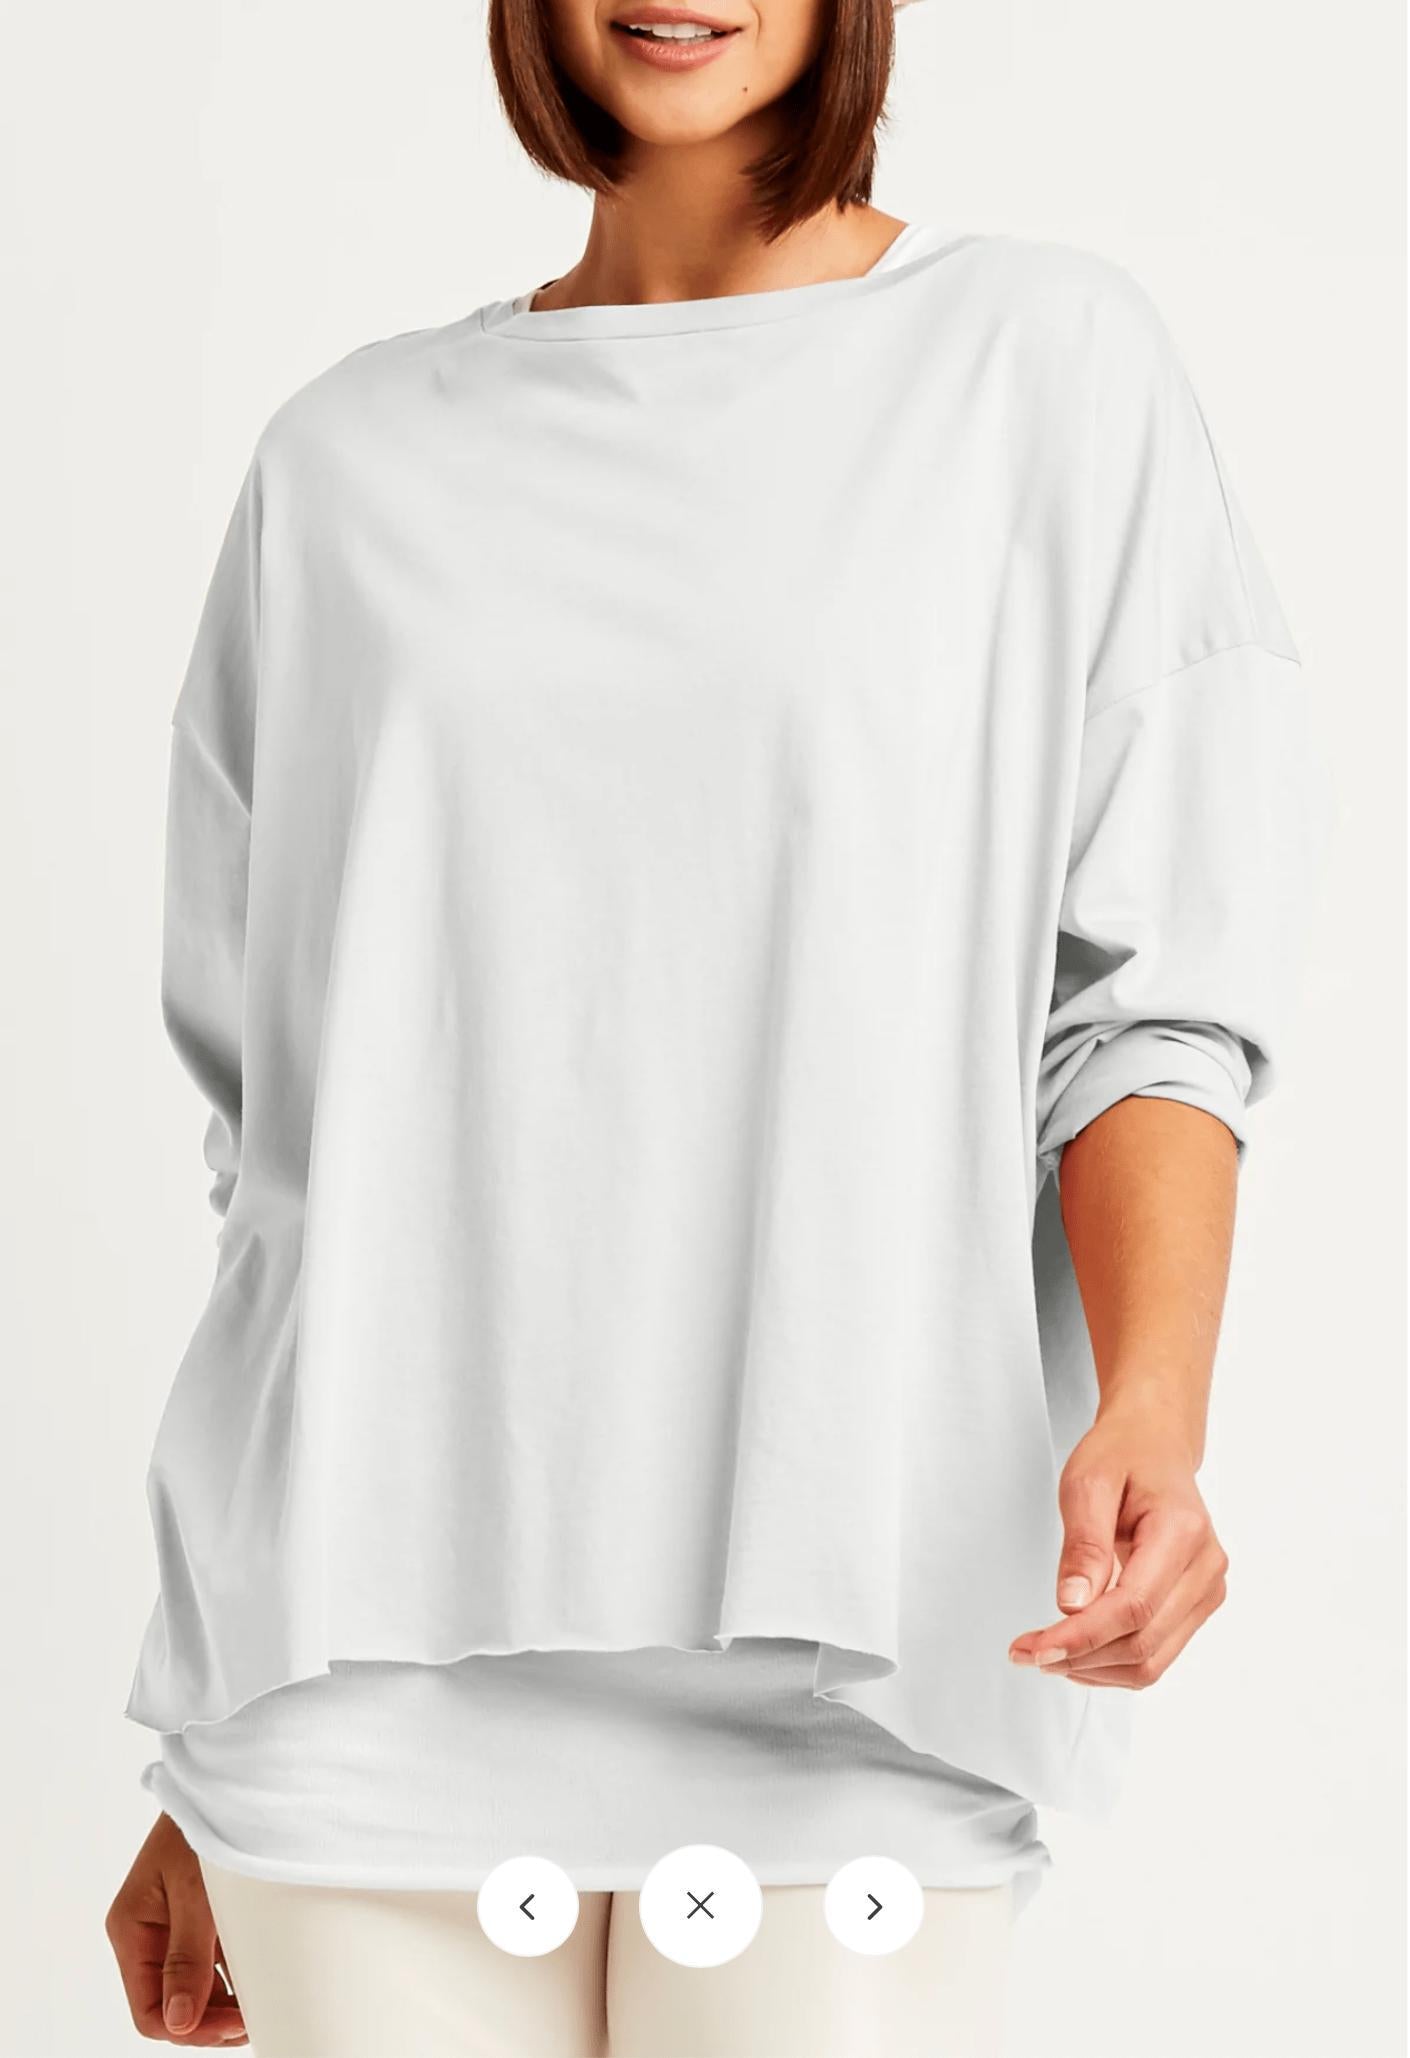 PLANET by Lauren G Women's Shirts & Tops Planet Boxy Tee O/S